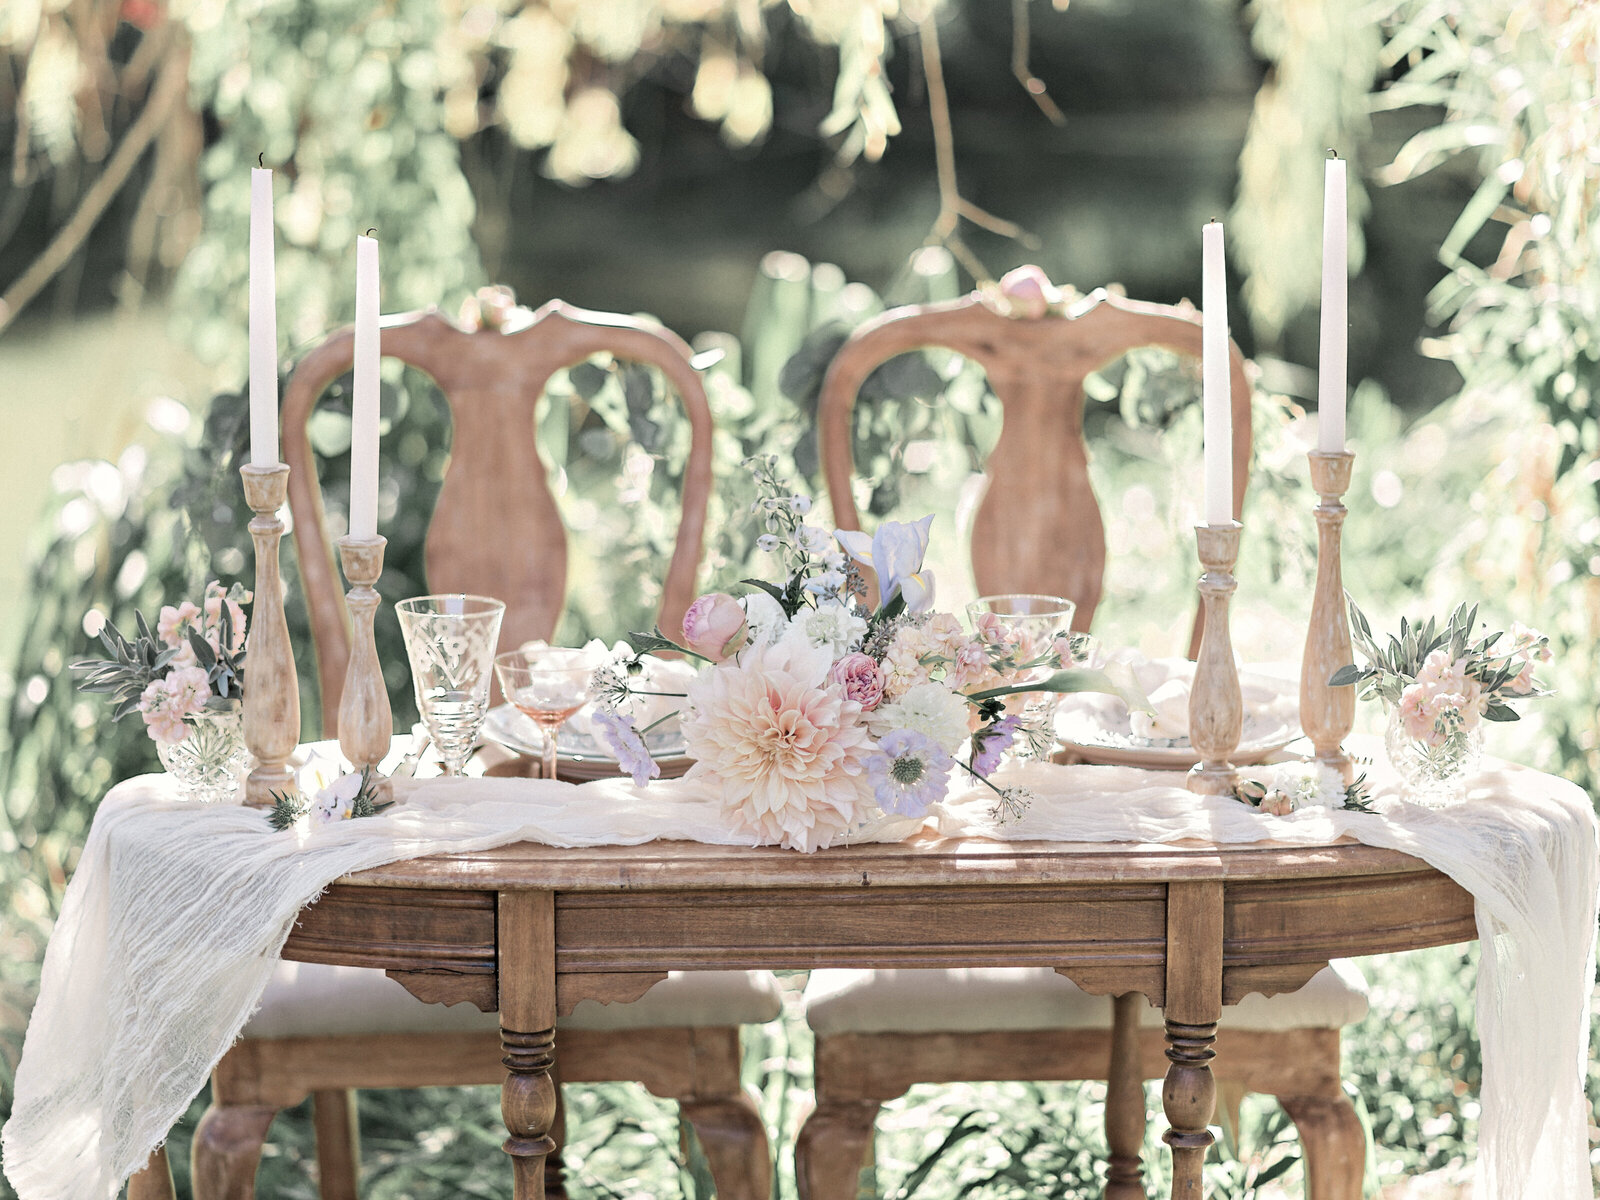 Vintage wedding table setting with flowers and candlesticks